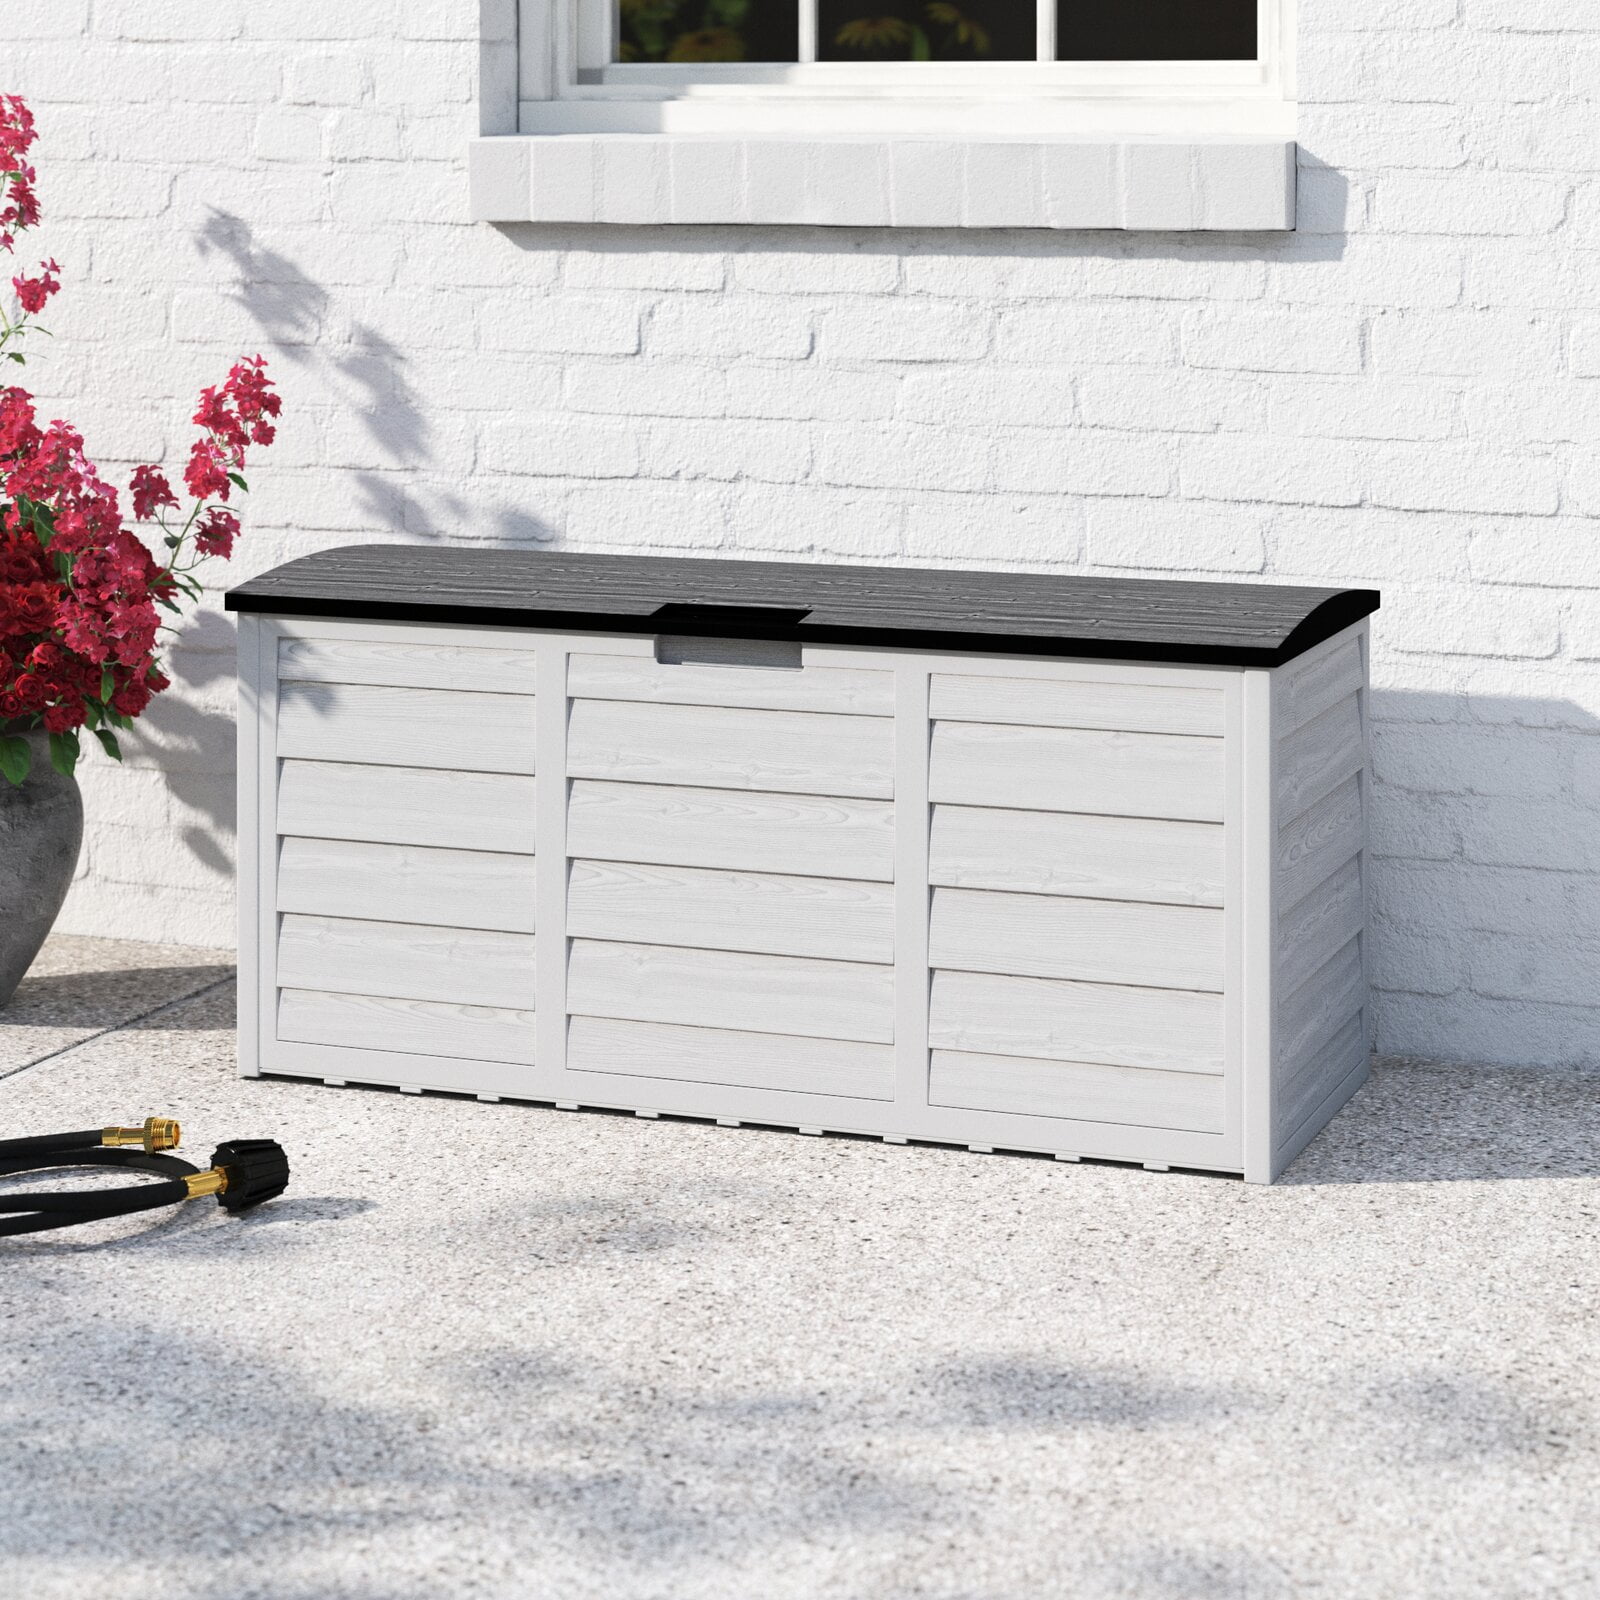 Details about   Outdoor Cargo Large Storage Roller Garden Box Plastic Deck Container Chest Lid 